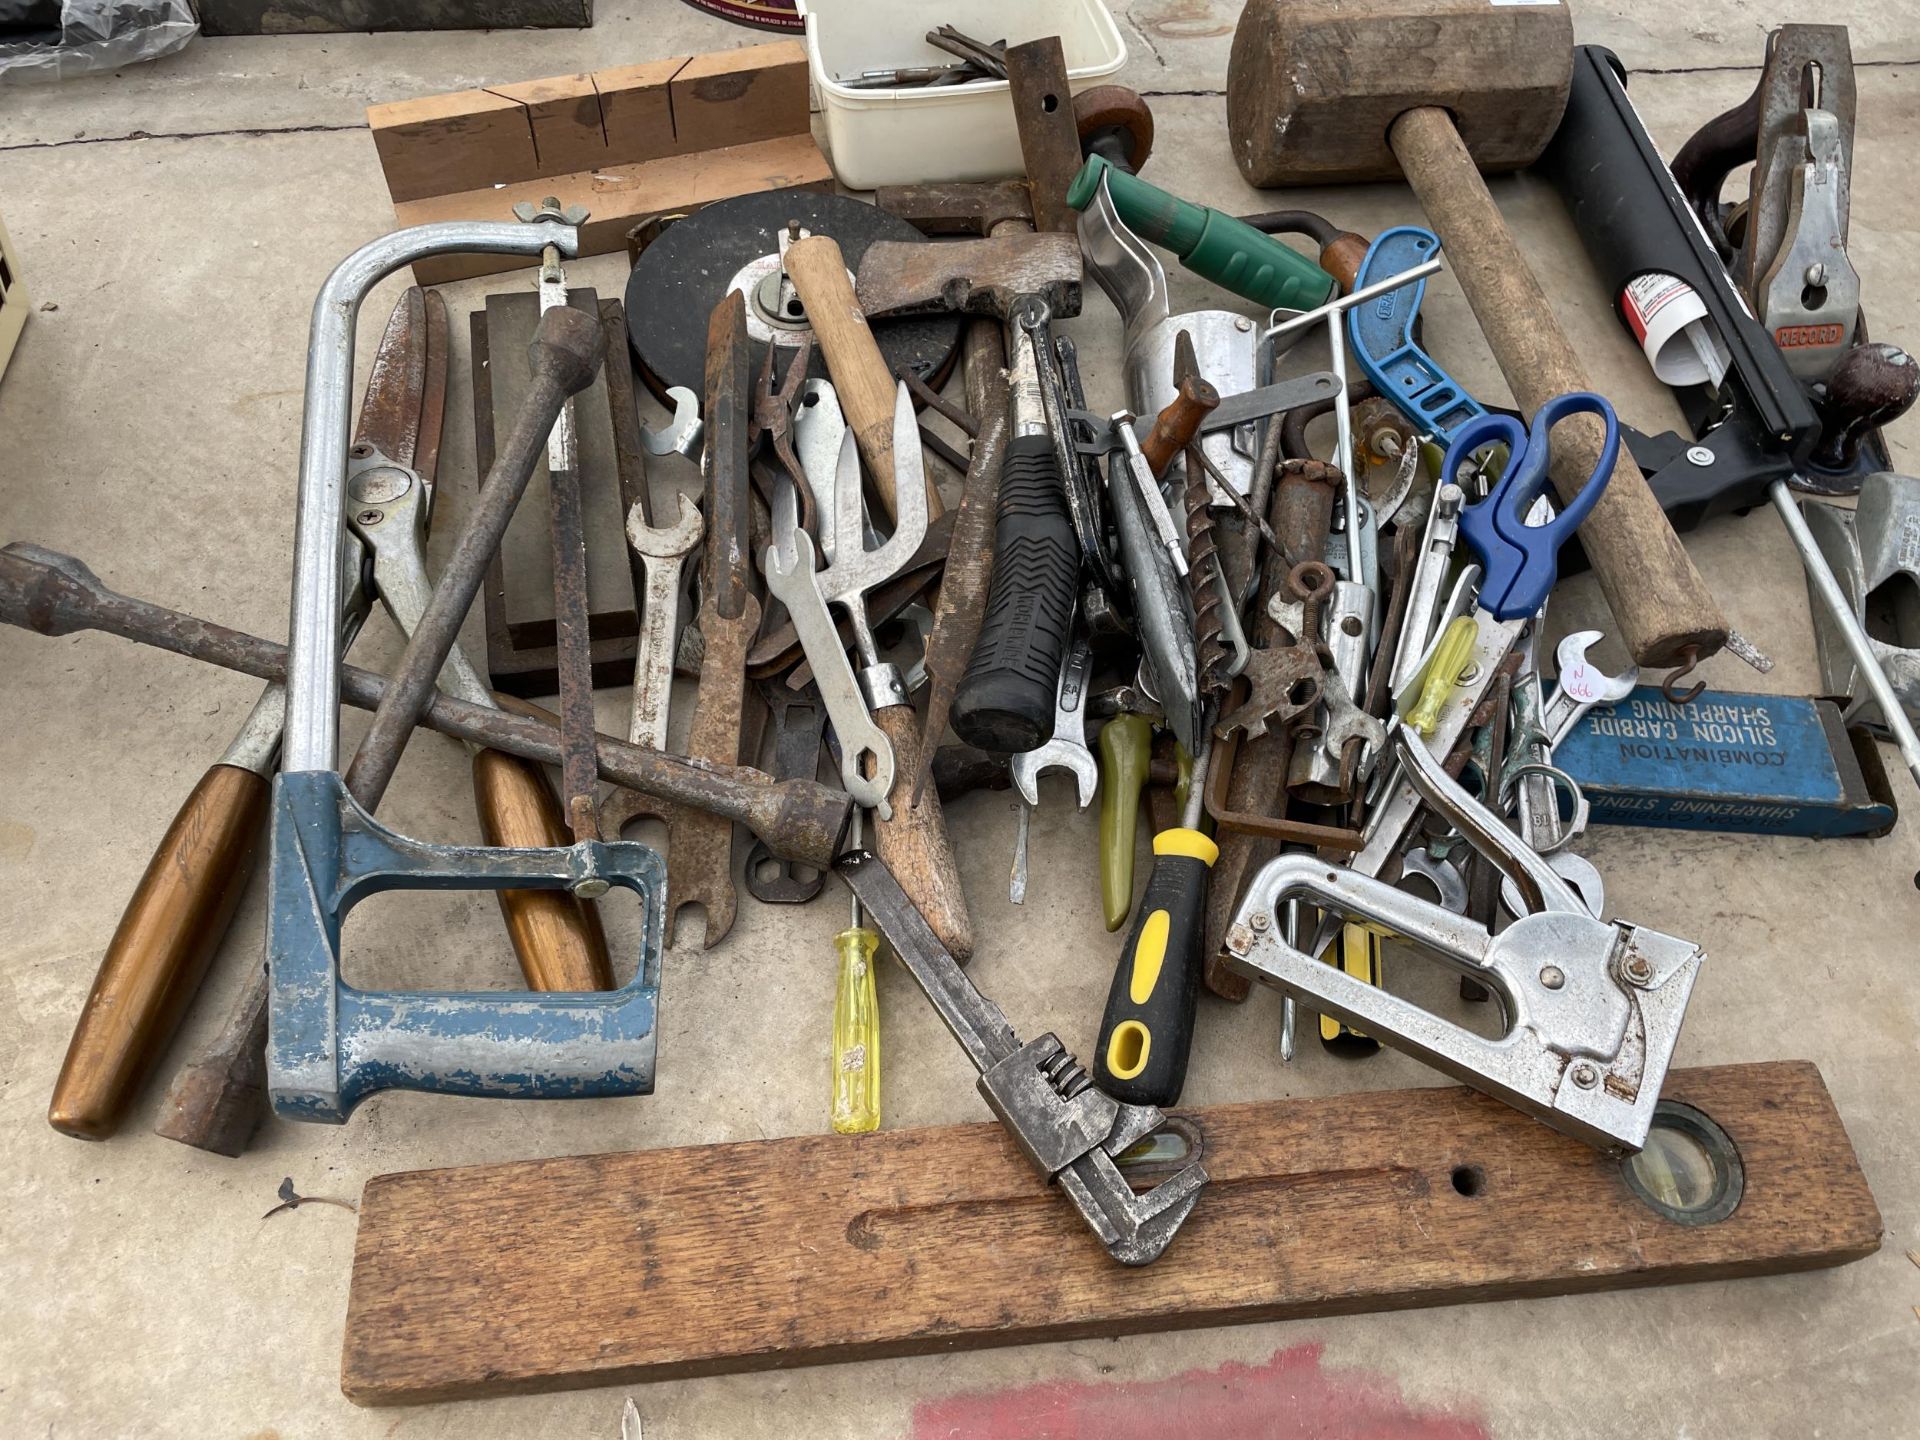 A LARGE ASSORTMENT OF HAND TOOLS TO INCLUDE SPANNERS, AN AXE AND WOOD PLANES ETC - Image 3 of 3